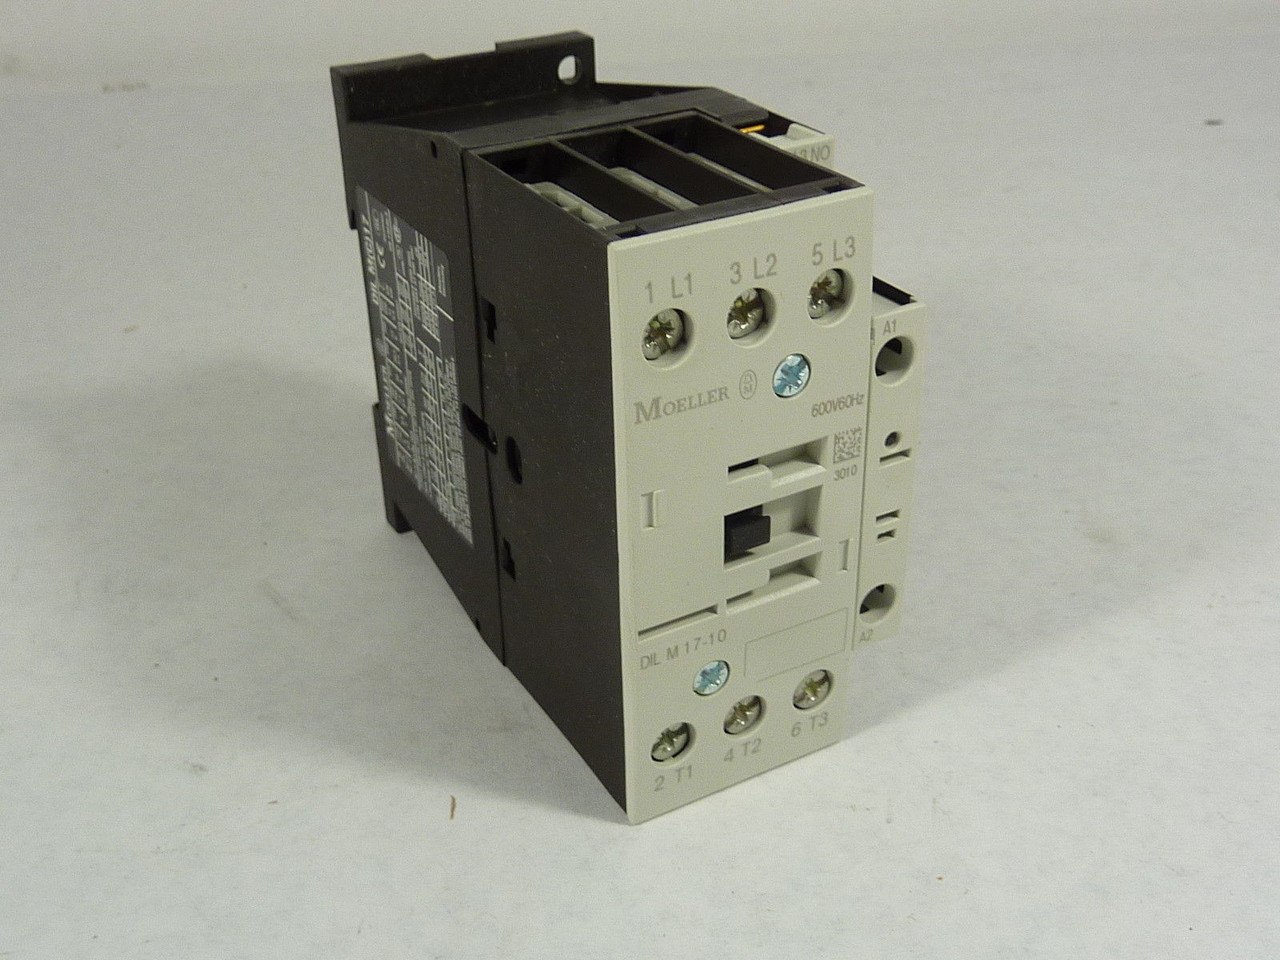 Moeller DILM17-10 Contactor 3 Pole 24V 40A ! NEW !